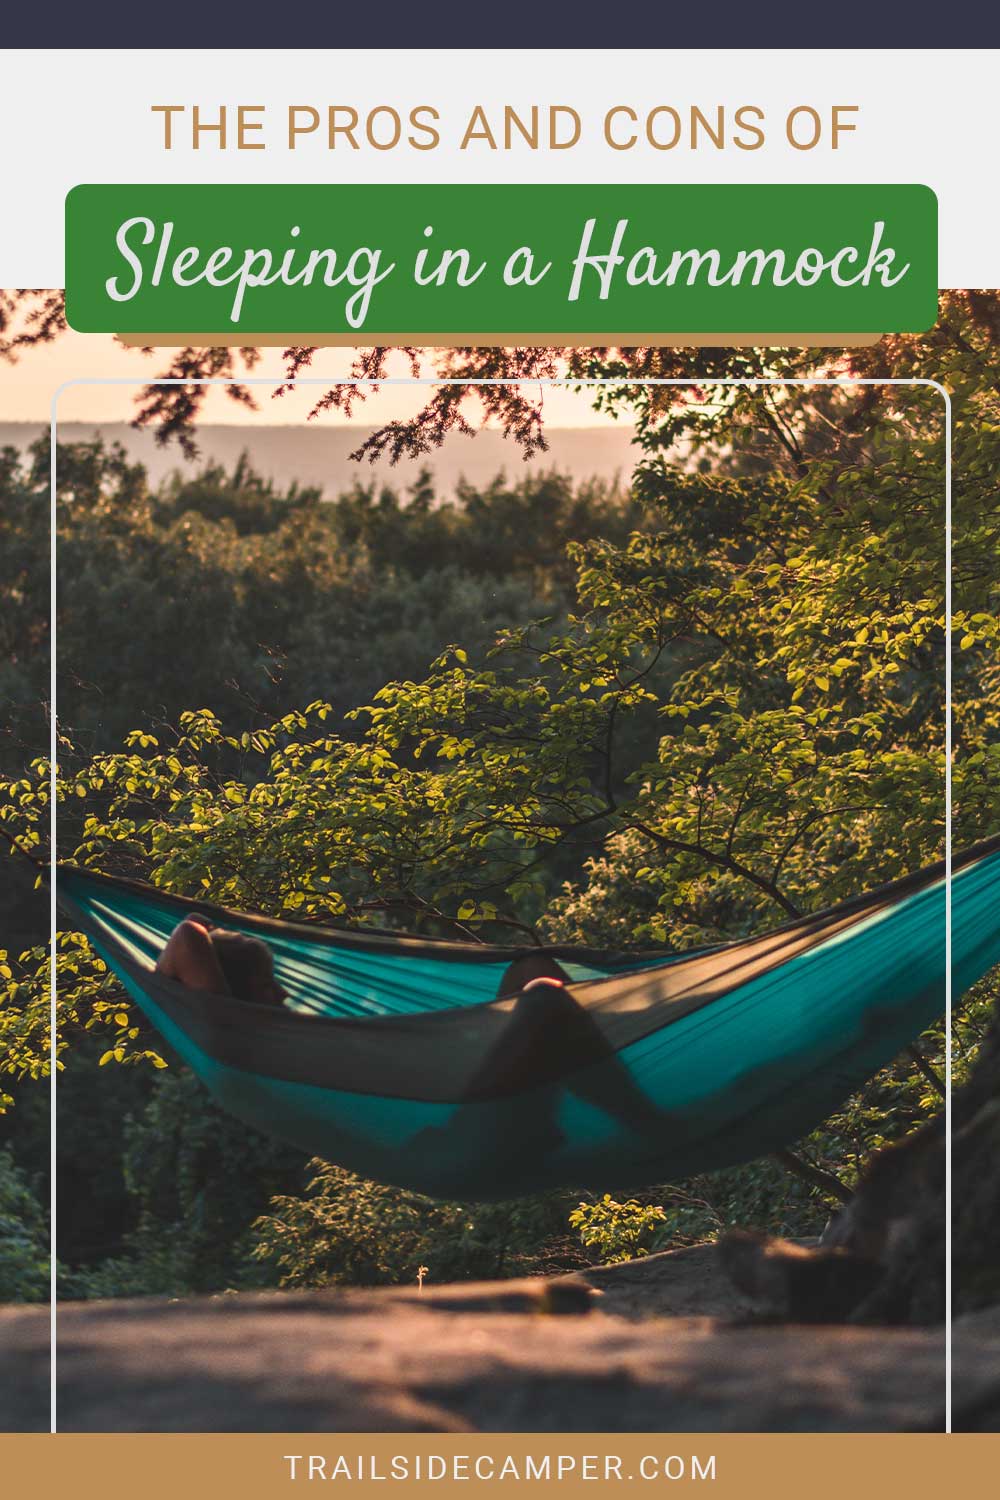 The Pros and Cons of Sleeping in a Hammock